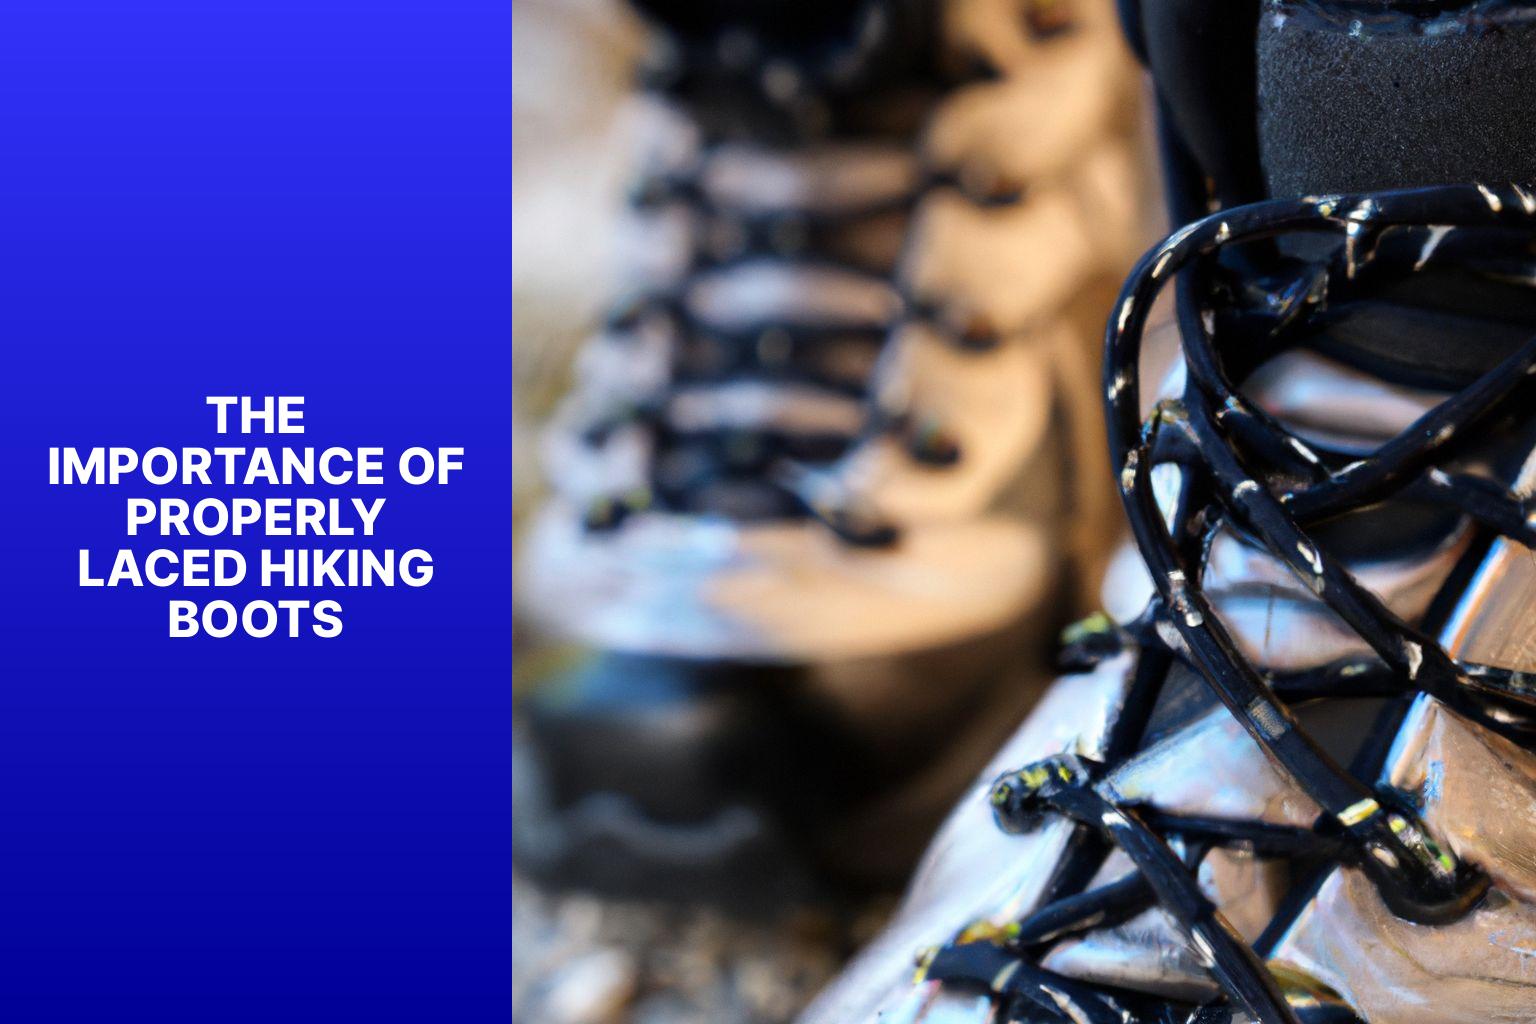 The Importance of Properly Laced Hiking Boots - How to Lace Hiking Boots to Prevent Toe Pain 